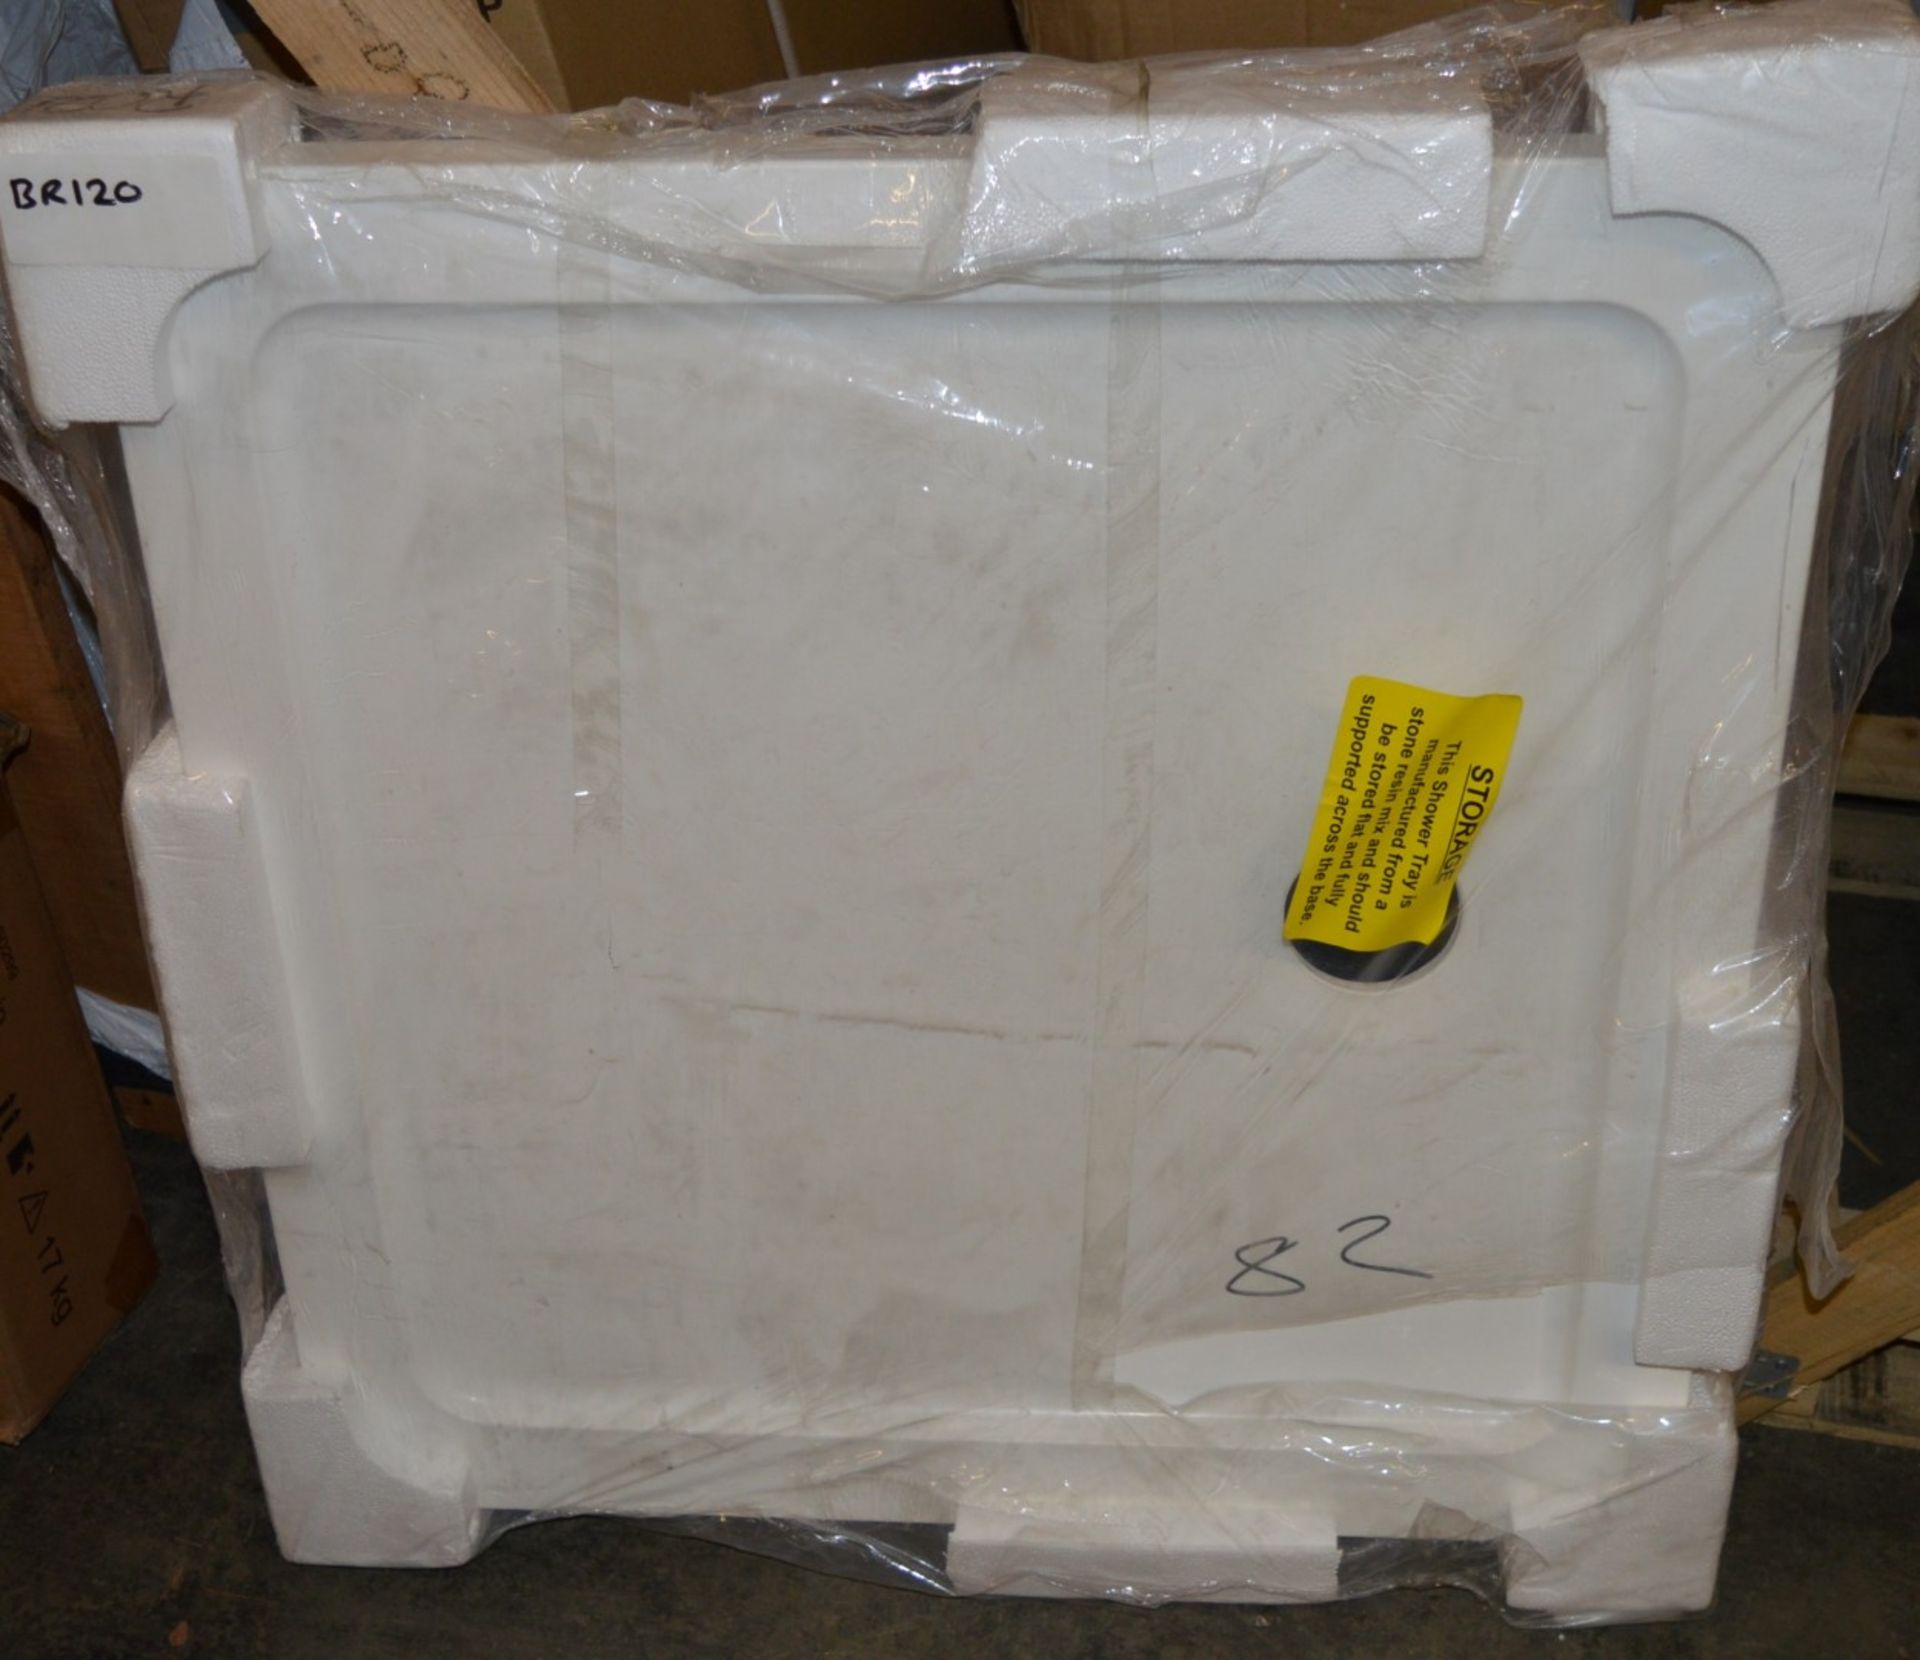 1 x Square Stone Shower Tray - 800x800mm - Type TR02 -  Unused Stock - CL190 - Ref BR120 - Location: